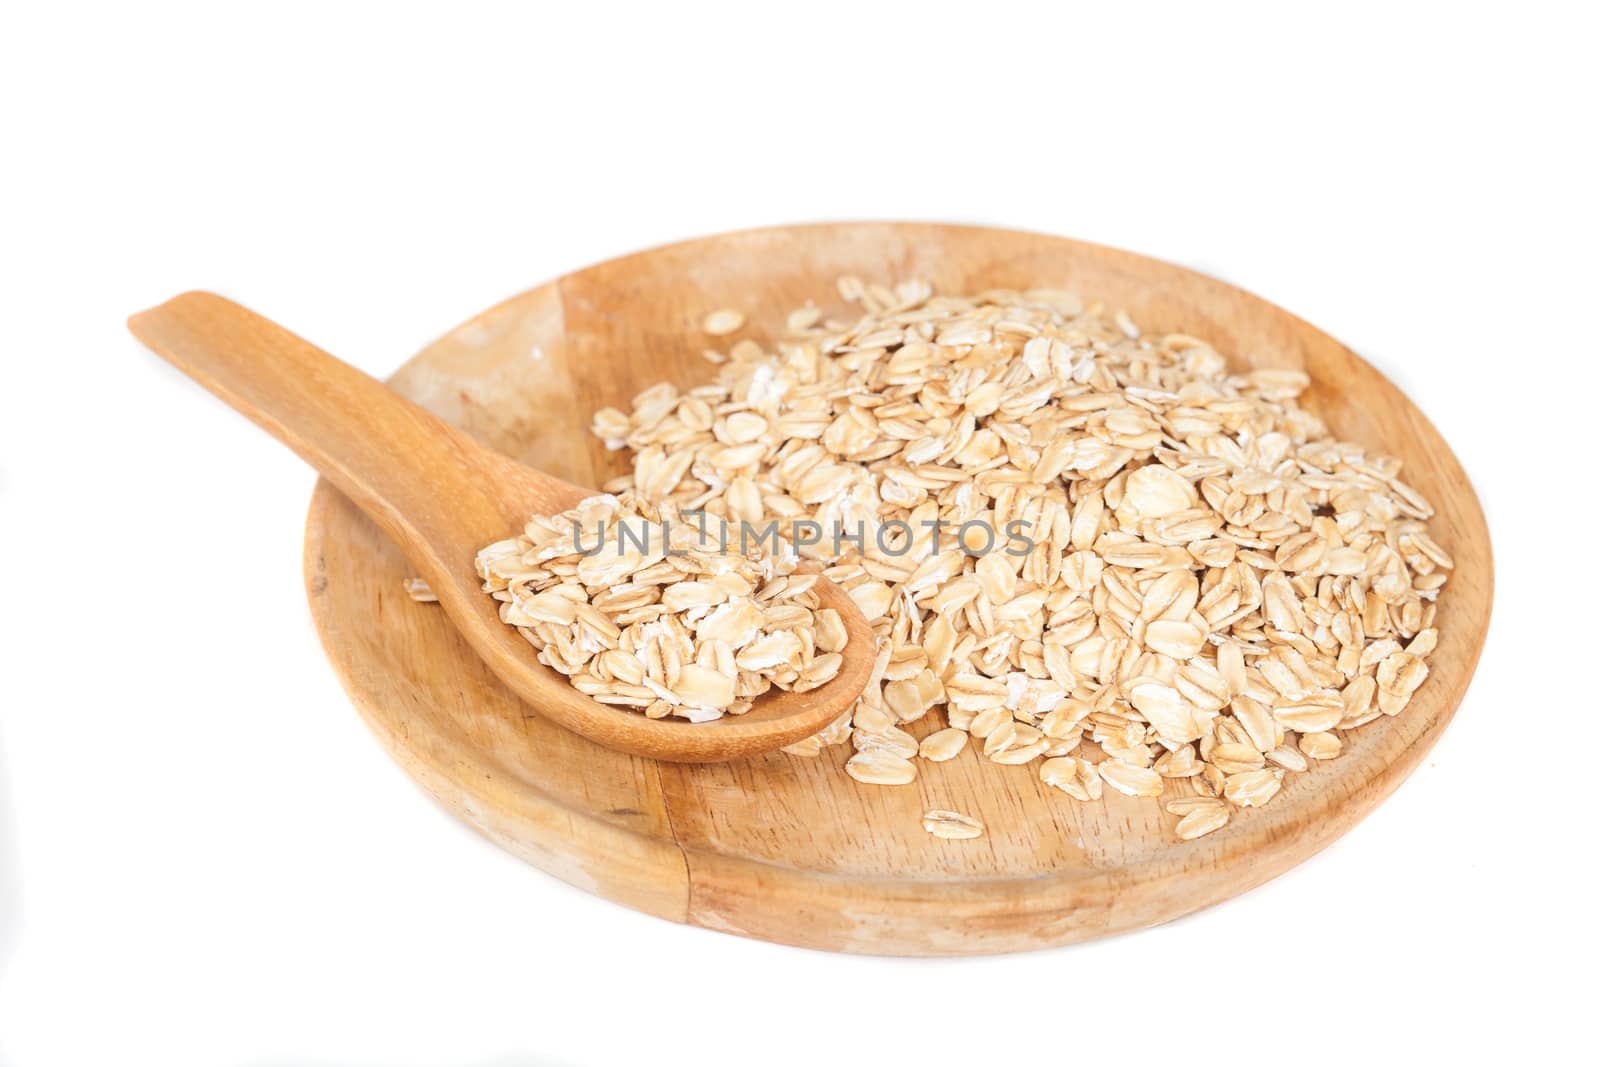 dish and wood spoon with oats flakes pile